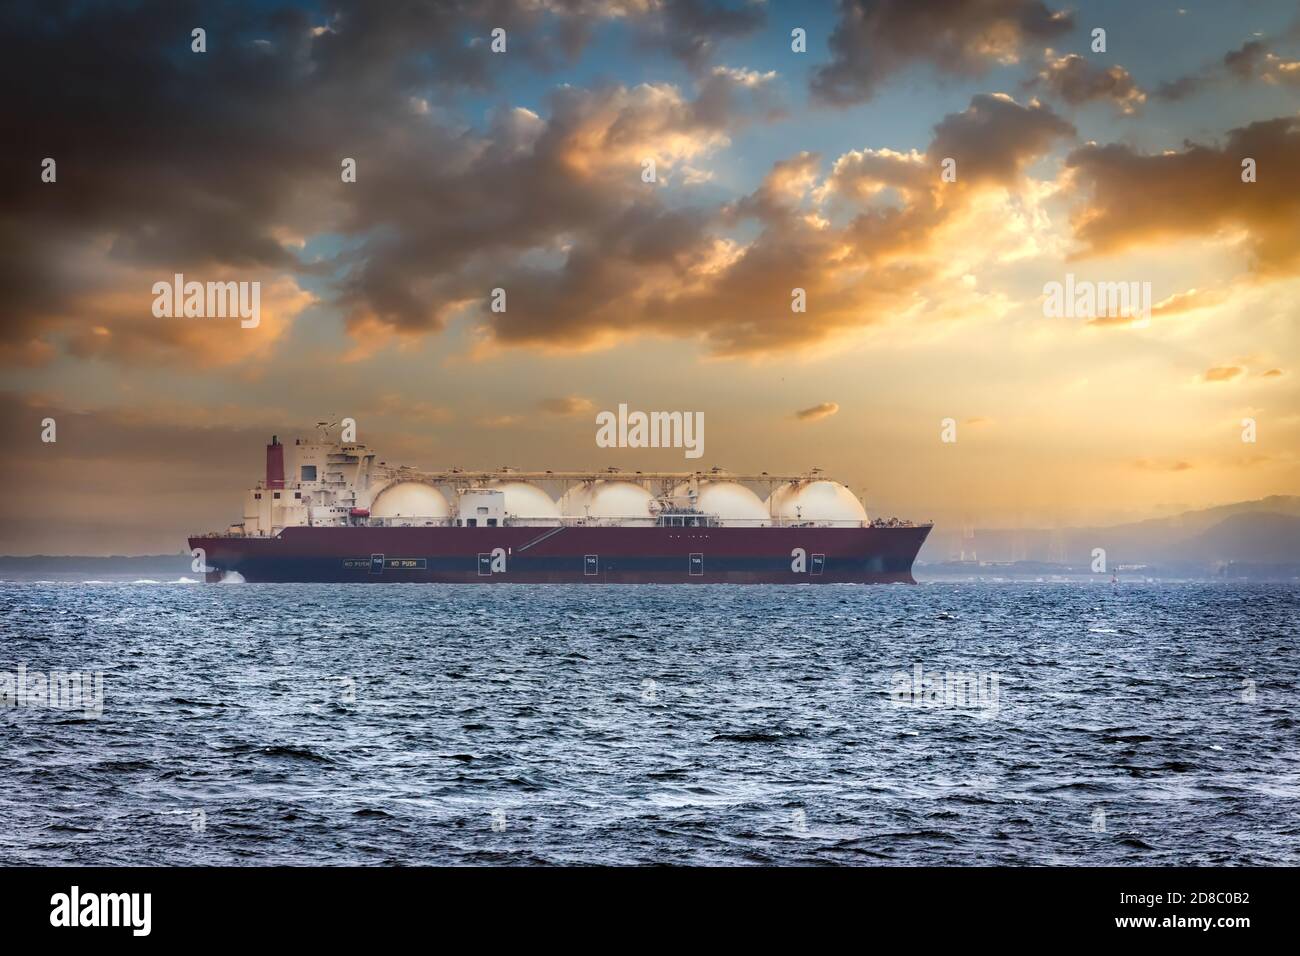 A Liquid Natural Gas tanker (LNG) in Japan’s Tokyo Bay at sunrise. Stock Photo